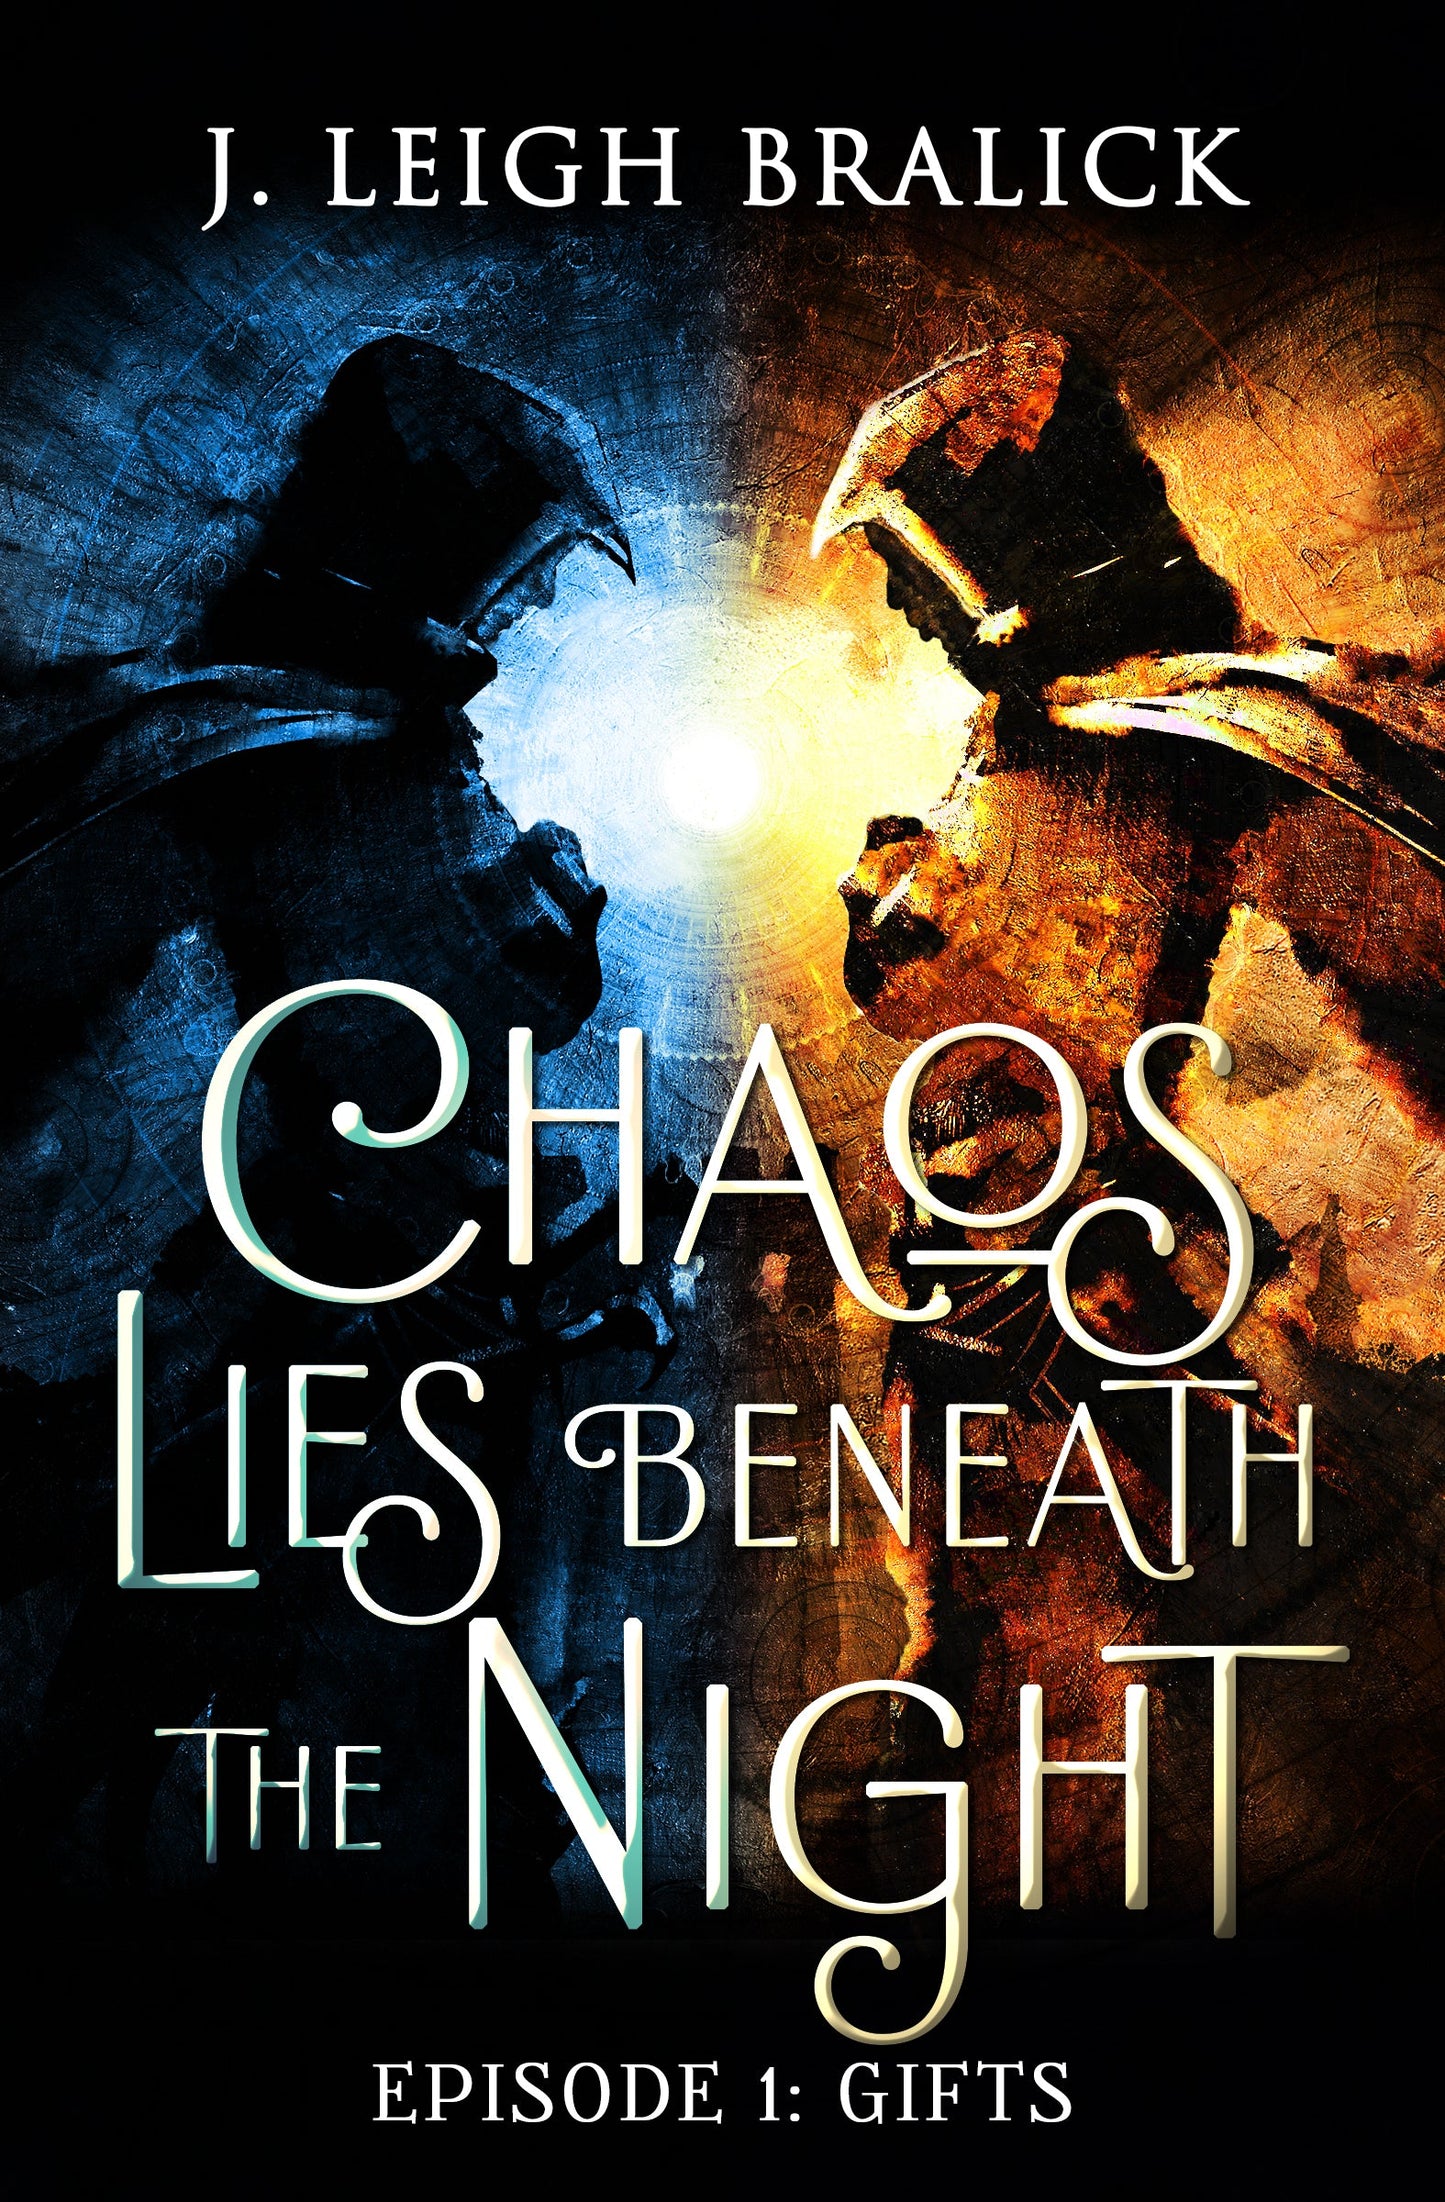 Chaos Lies Beneath the Night, Episode 1: Gifts - SIGNED Paperback